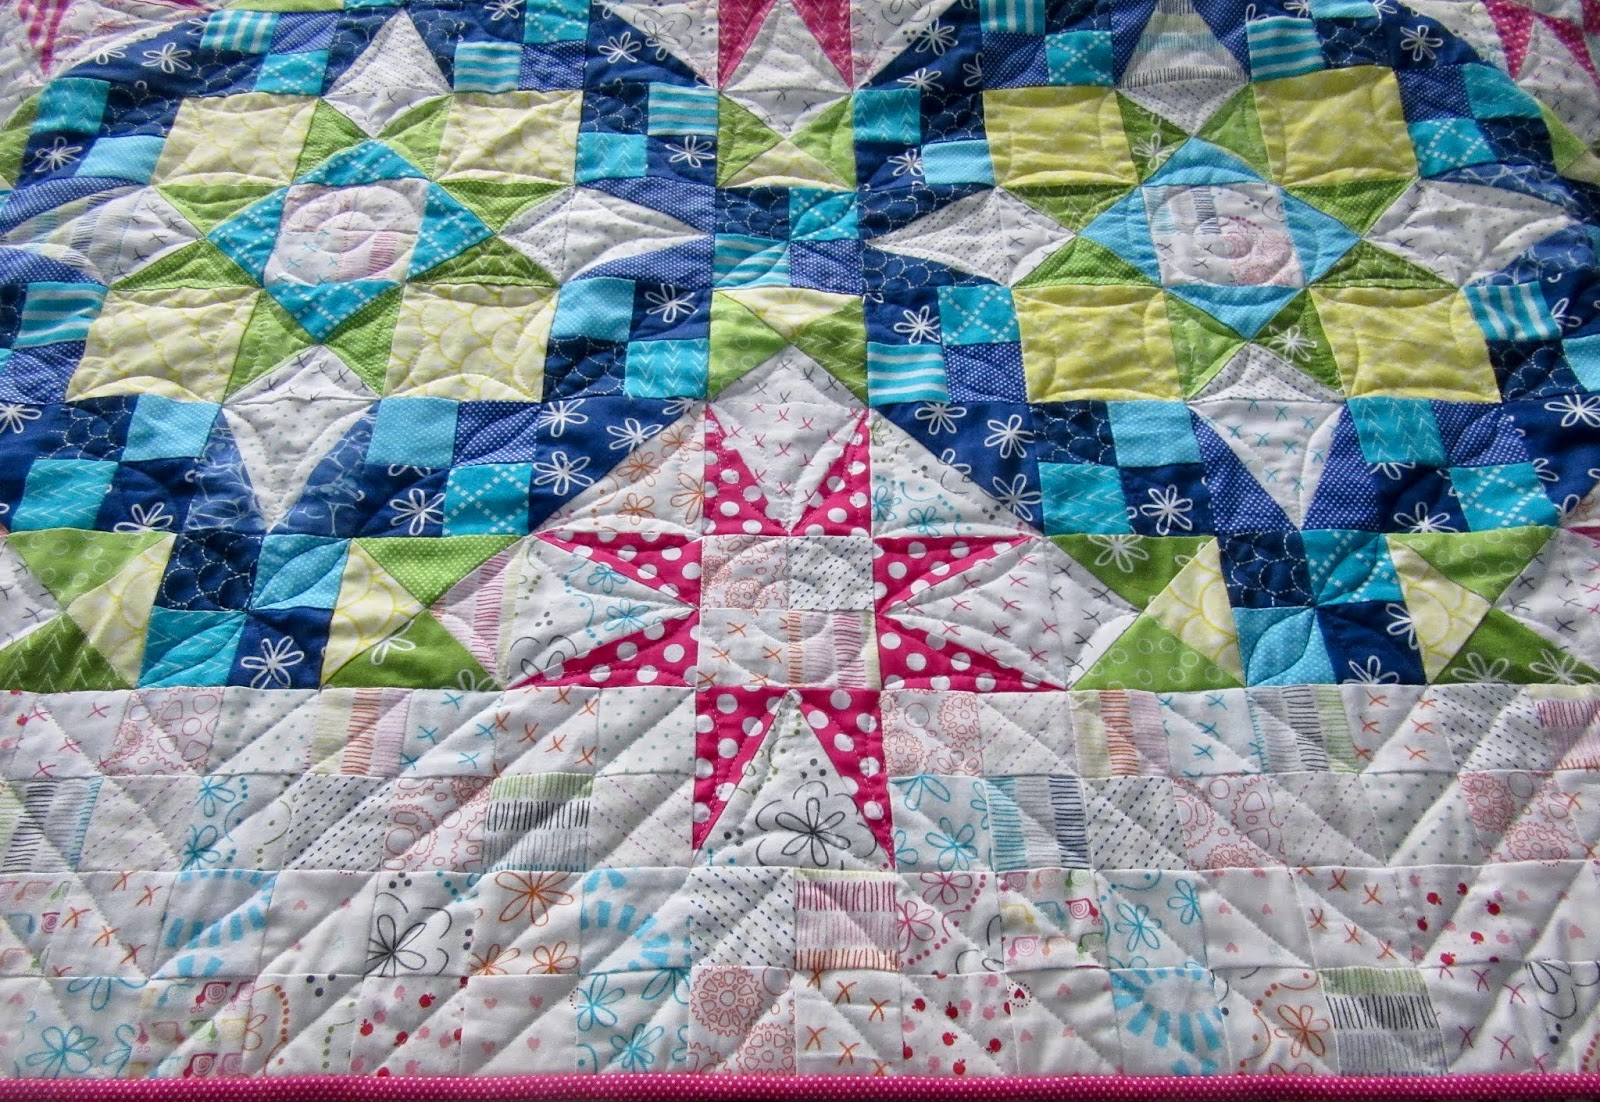 Kathy's Quilts: Finished Quilt!